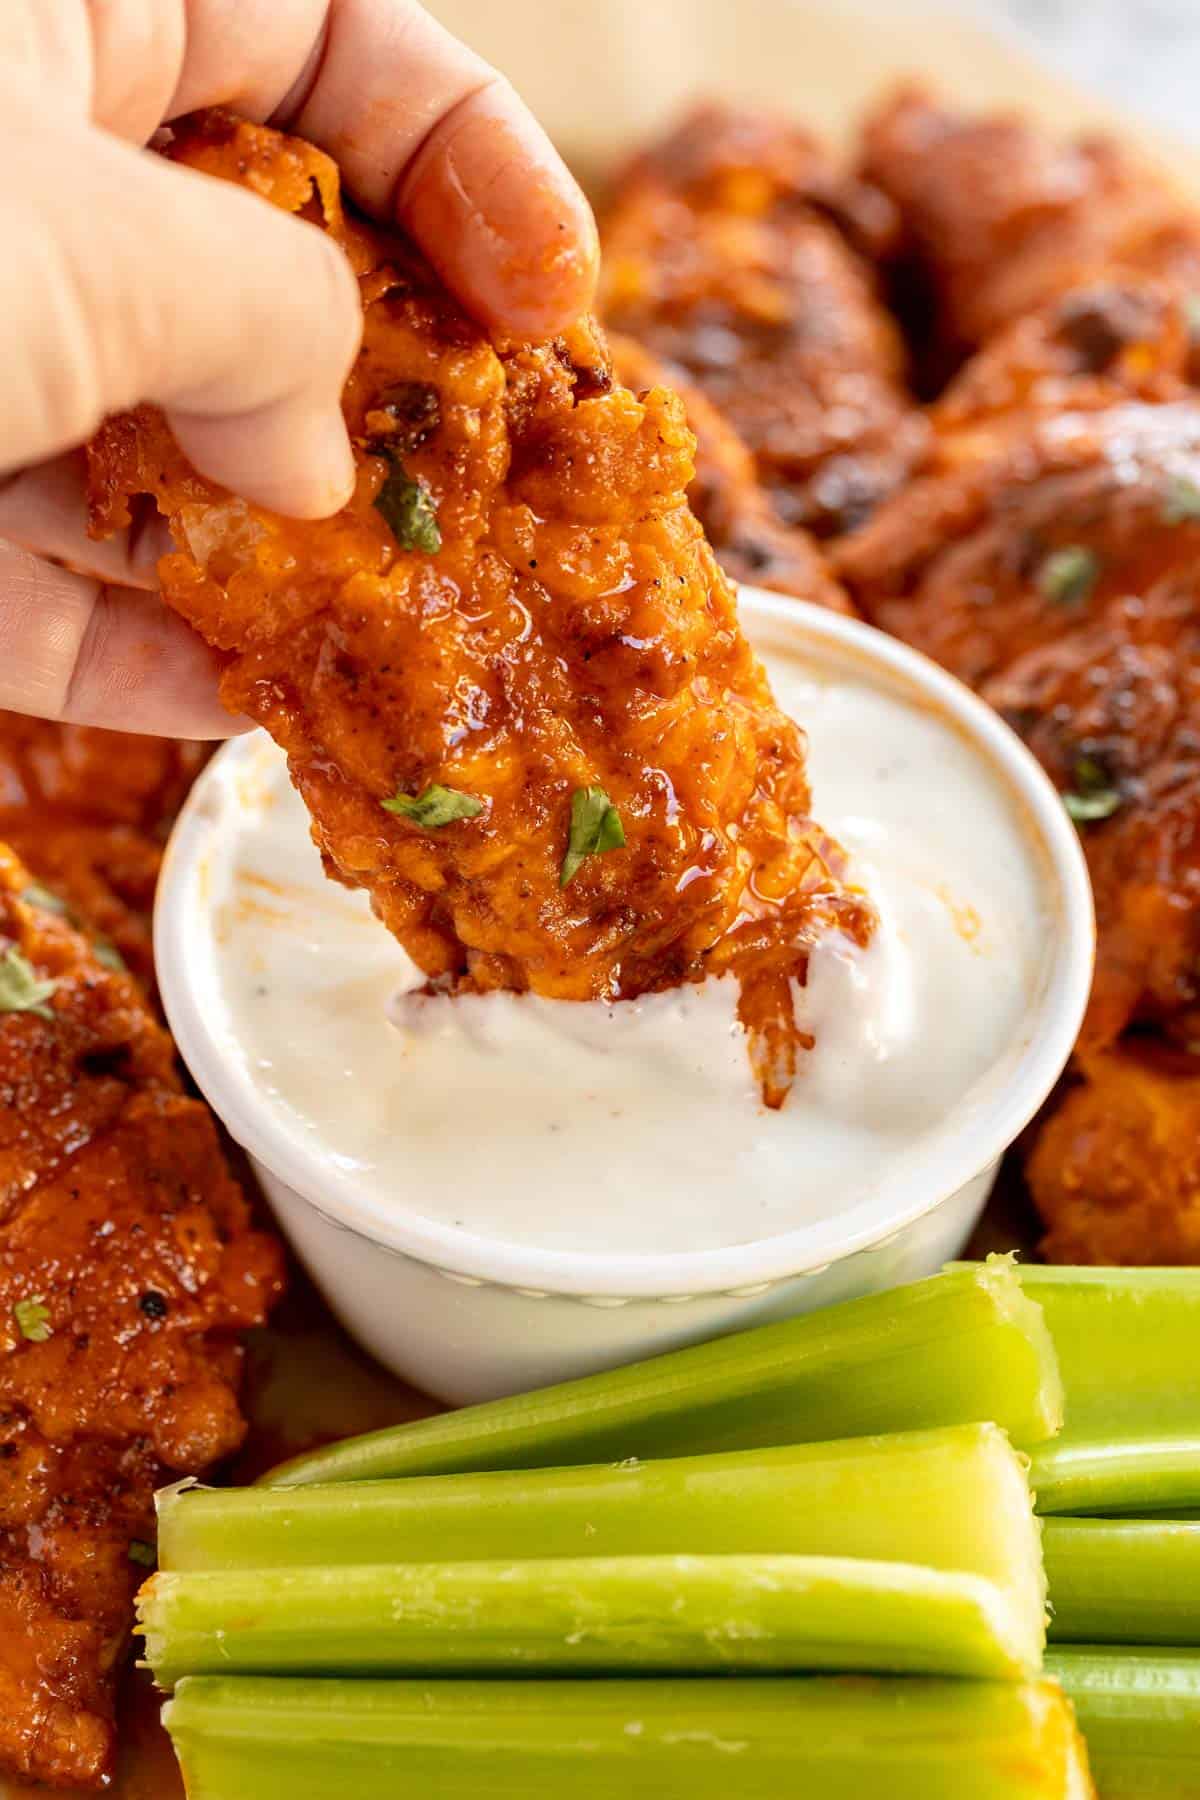 buffalo chicken tender being dipped in ranch dresssing.